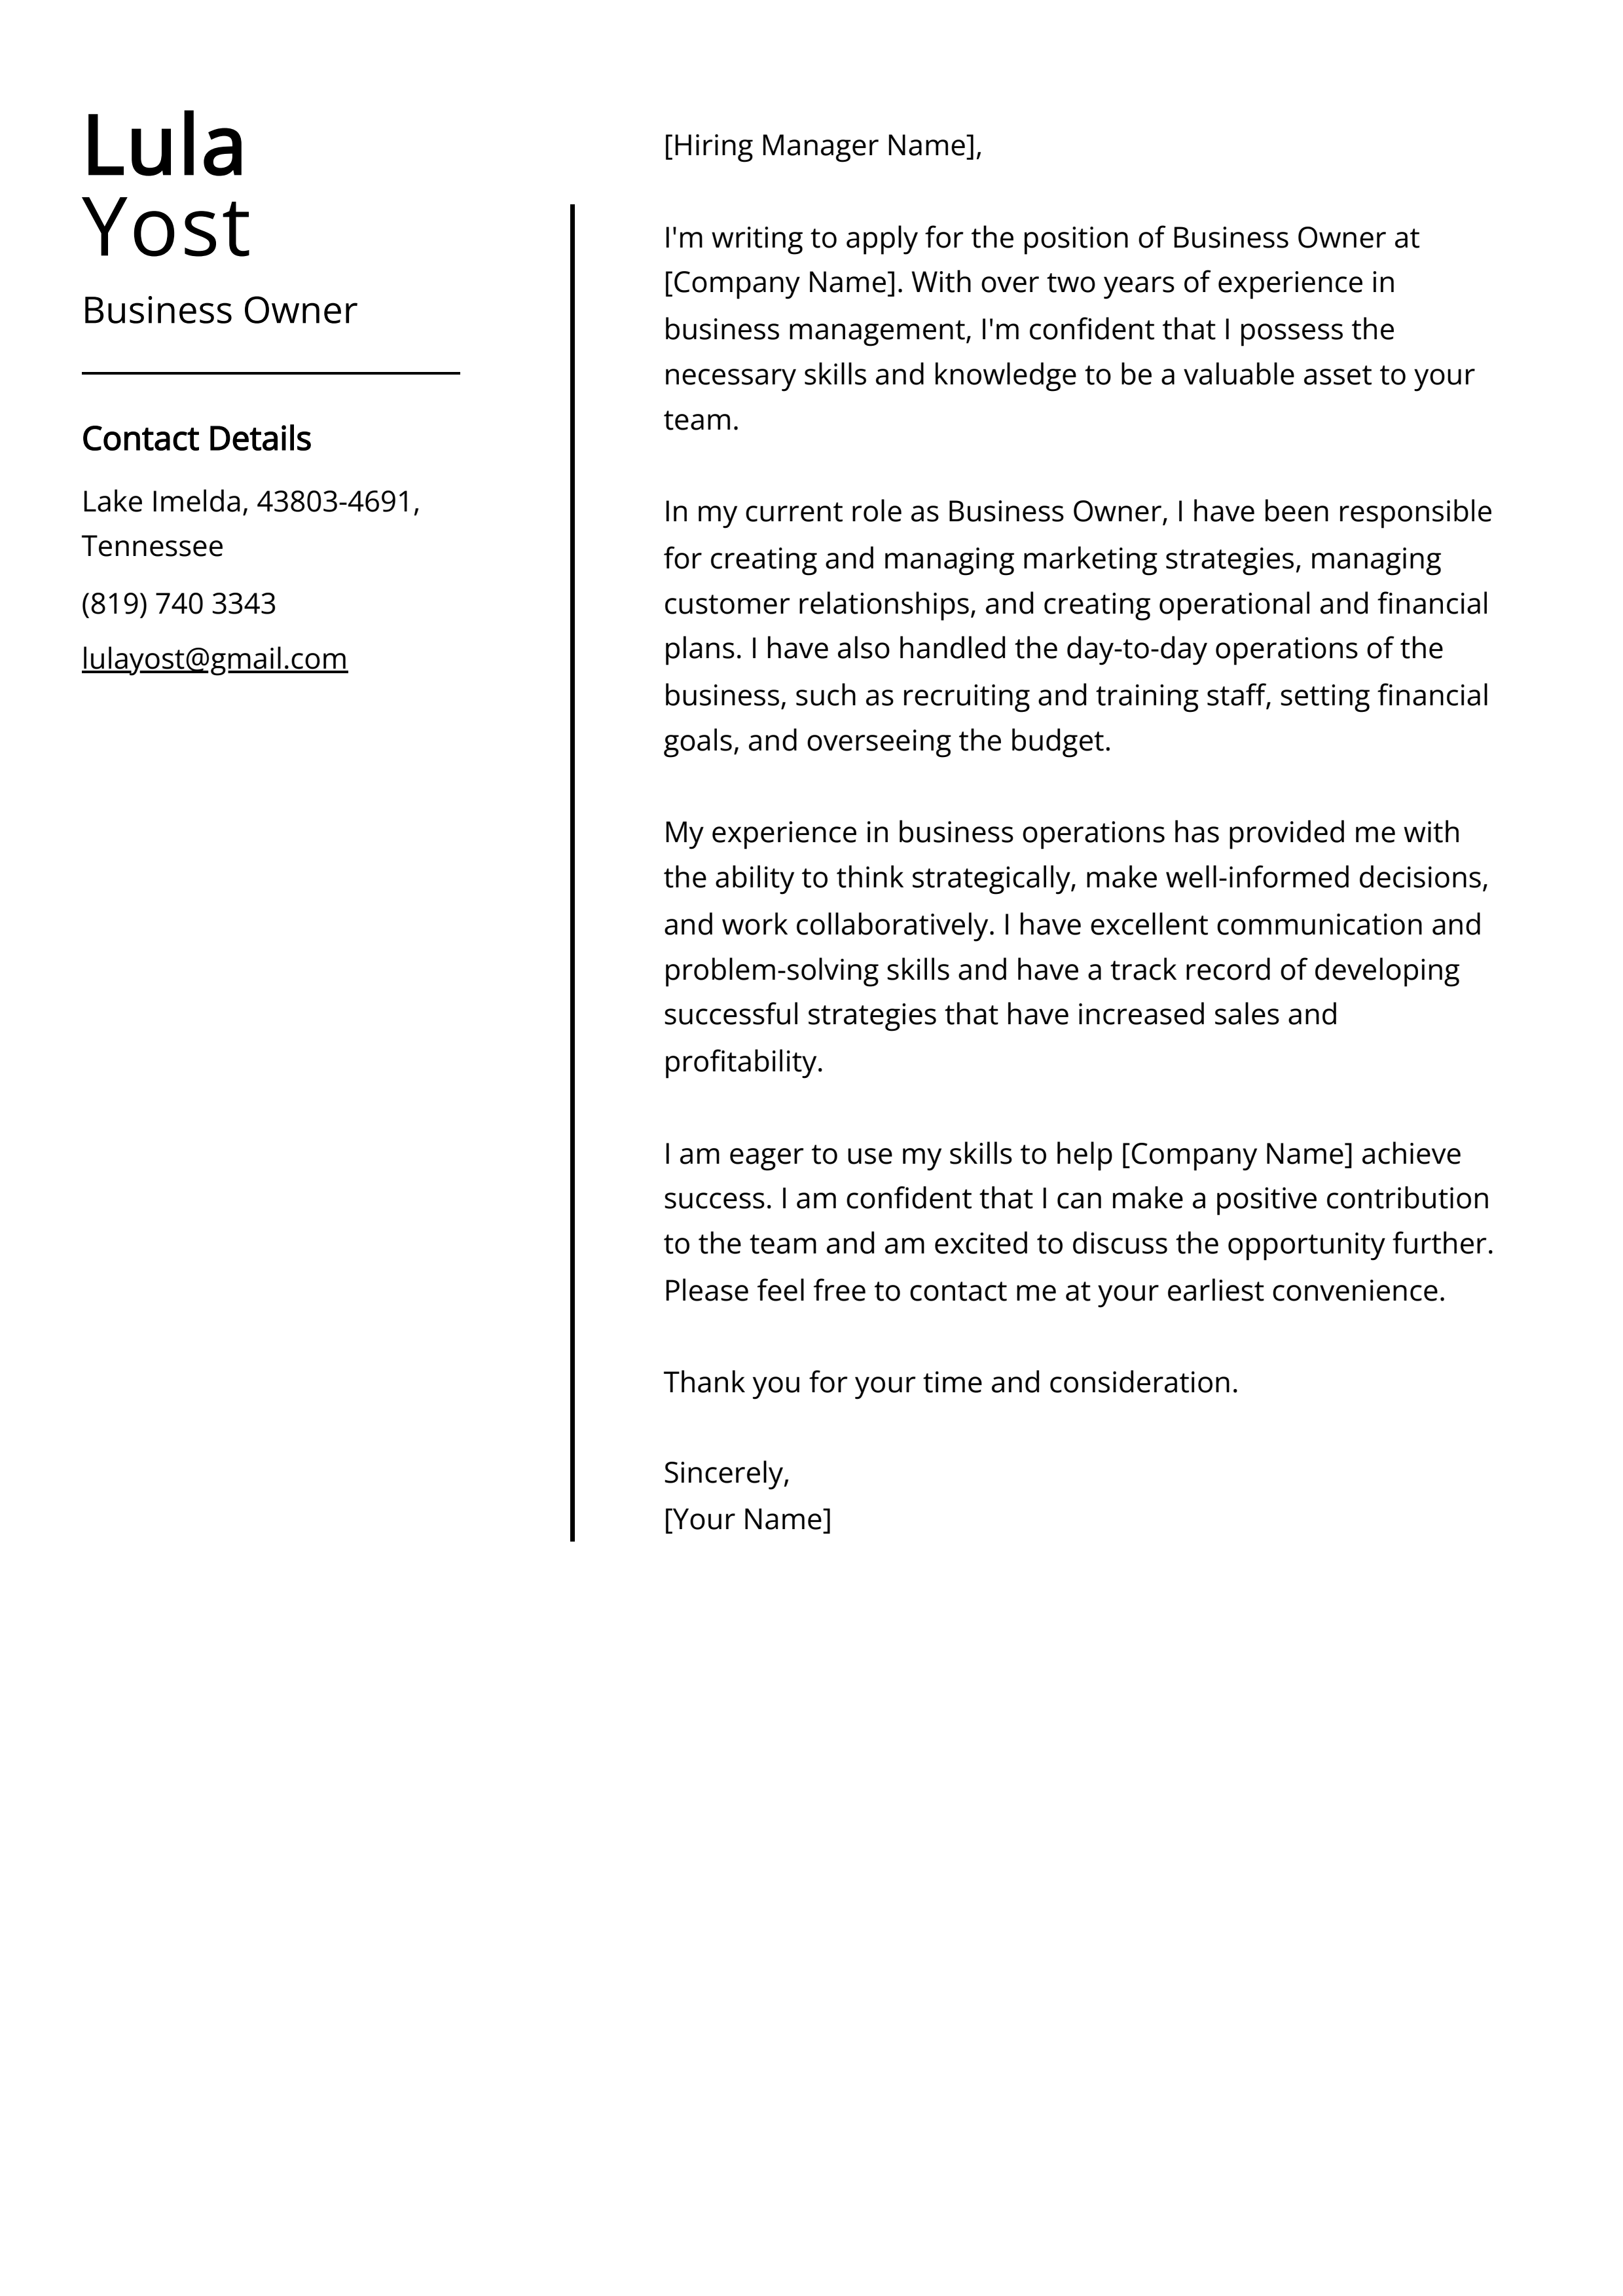 Business Owner Cover Letter Example